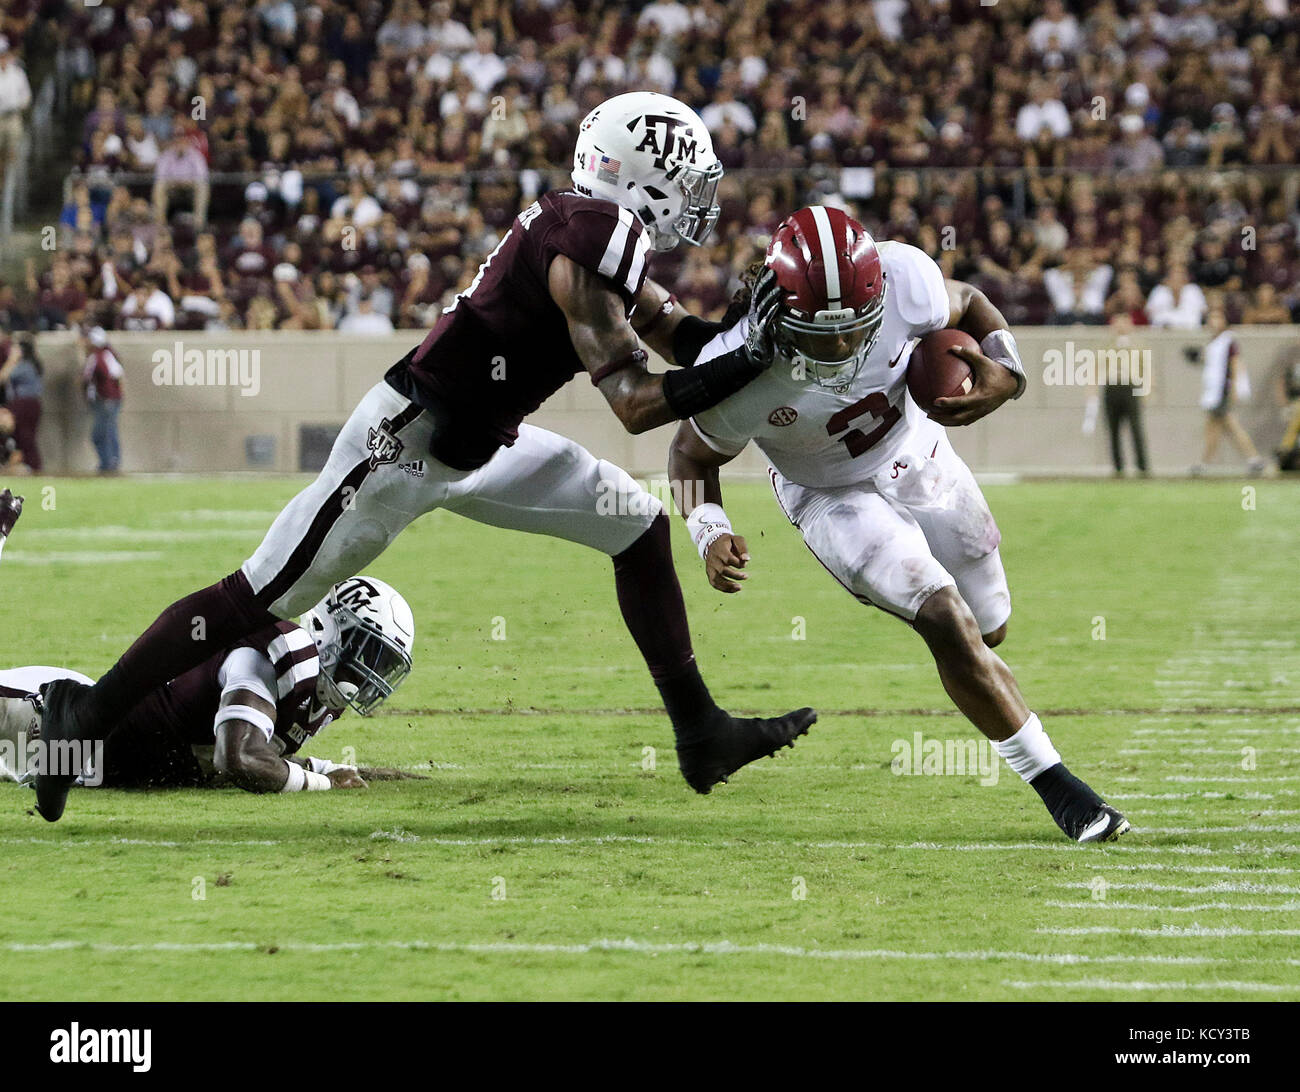 October 6, 2017: Alabama Crimson Tide wide receiver Calvin Ridley (3) runs down the sideline in the third quarterduring the NCAA football game between the Alabama Crimson Tide and the Texas A&M Aggies at Kyle Field in College Station, TX; John Glaser/CSM. Stock Photo